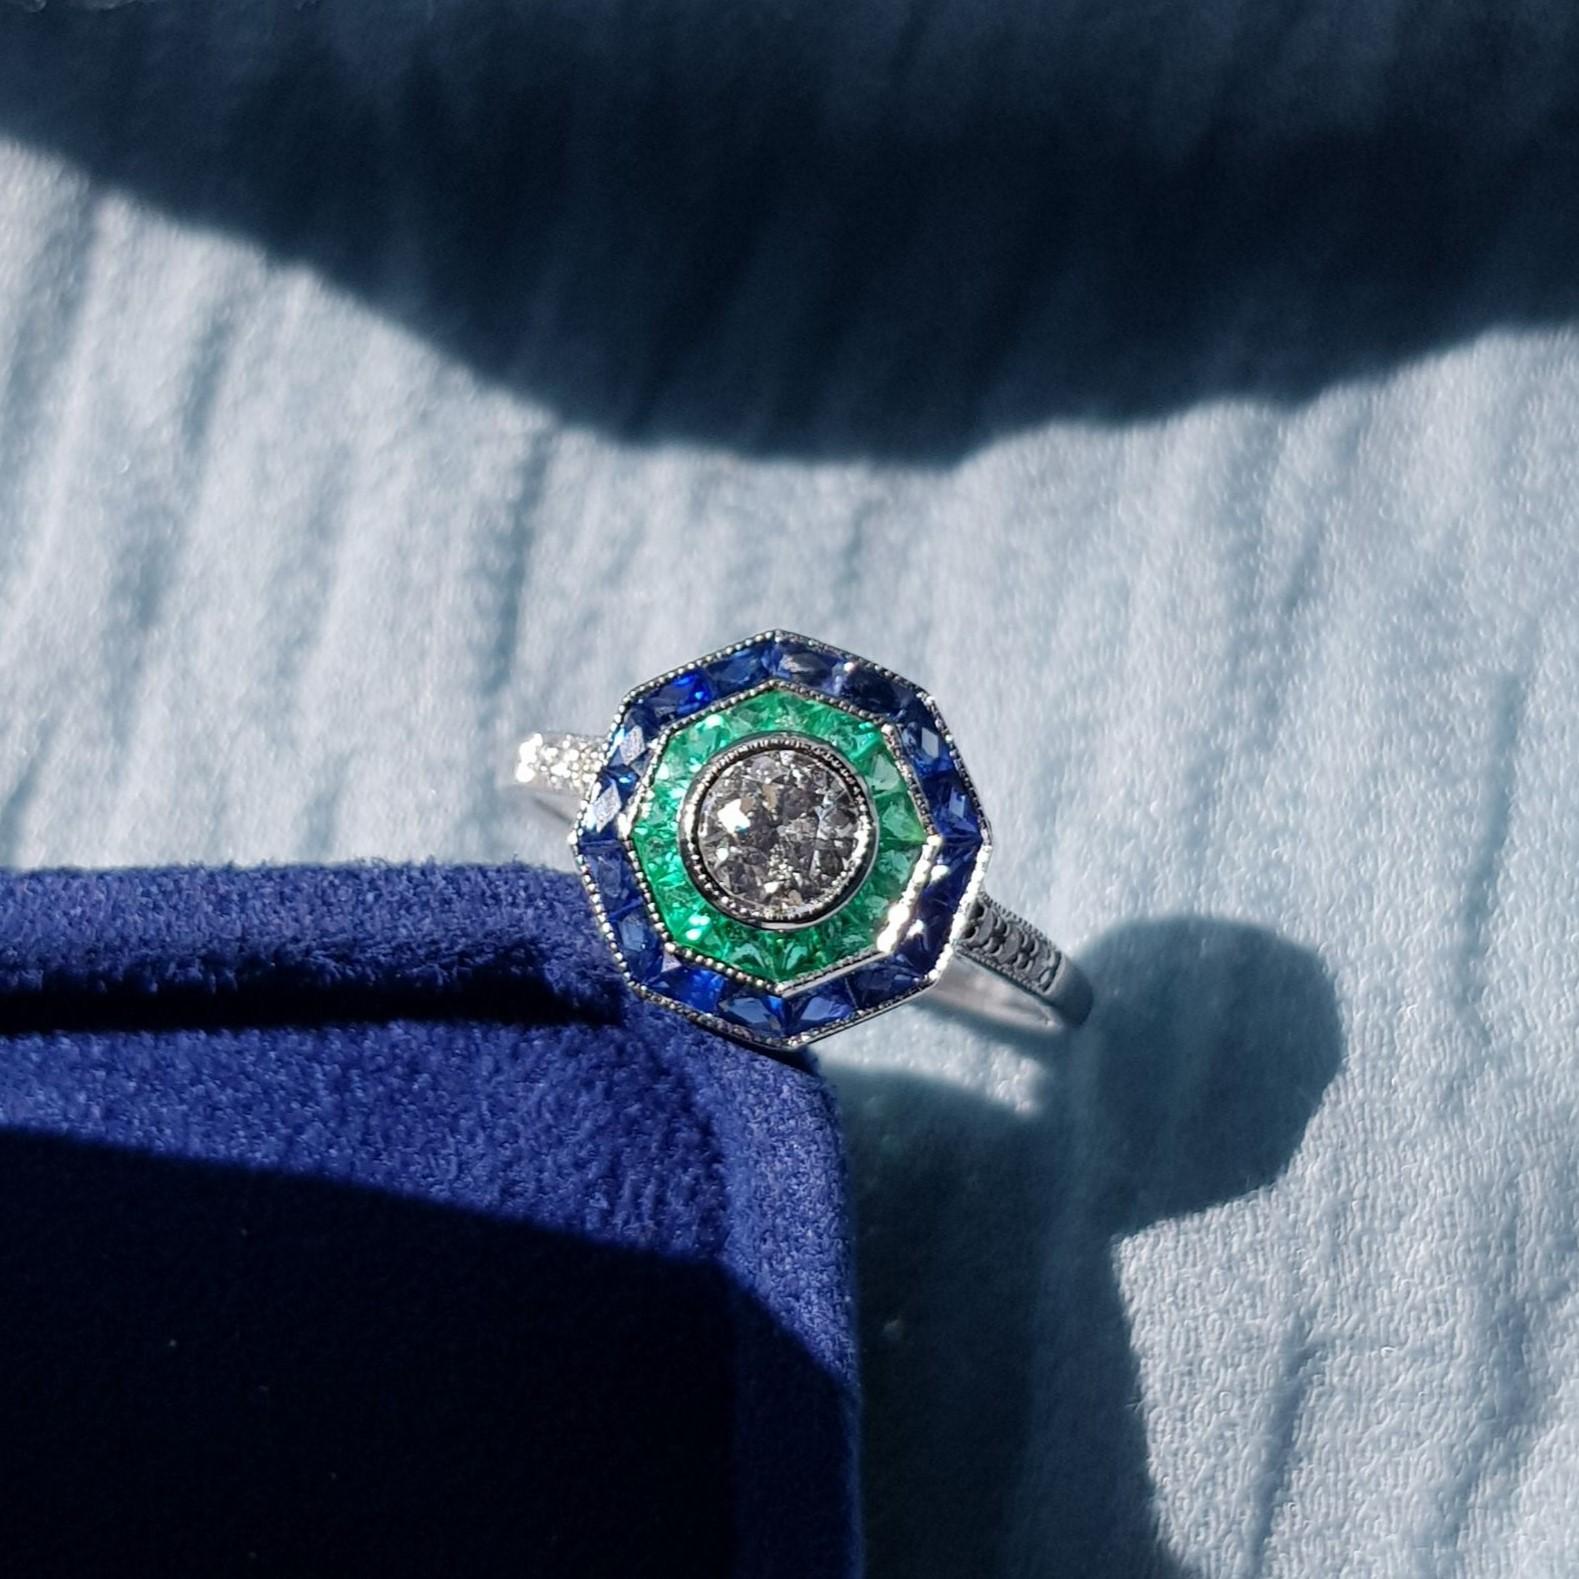 An incredibly stylish Art Deco target ring, set with a double halo clusters of gemstones – blue sapphire  and emerald around a central old cut diamond. The diamonds are bright, displaying excellent flash and sparkle, while the sapphire and emerald